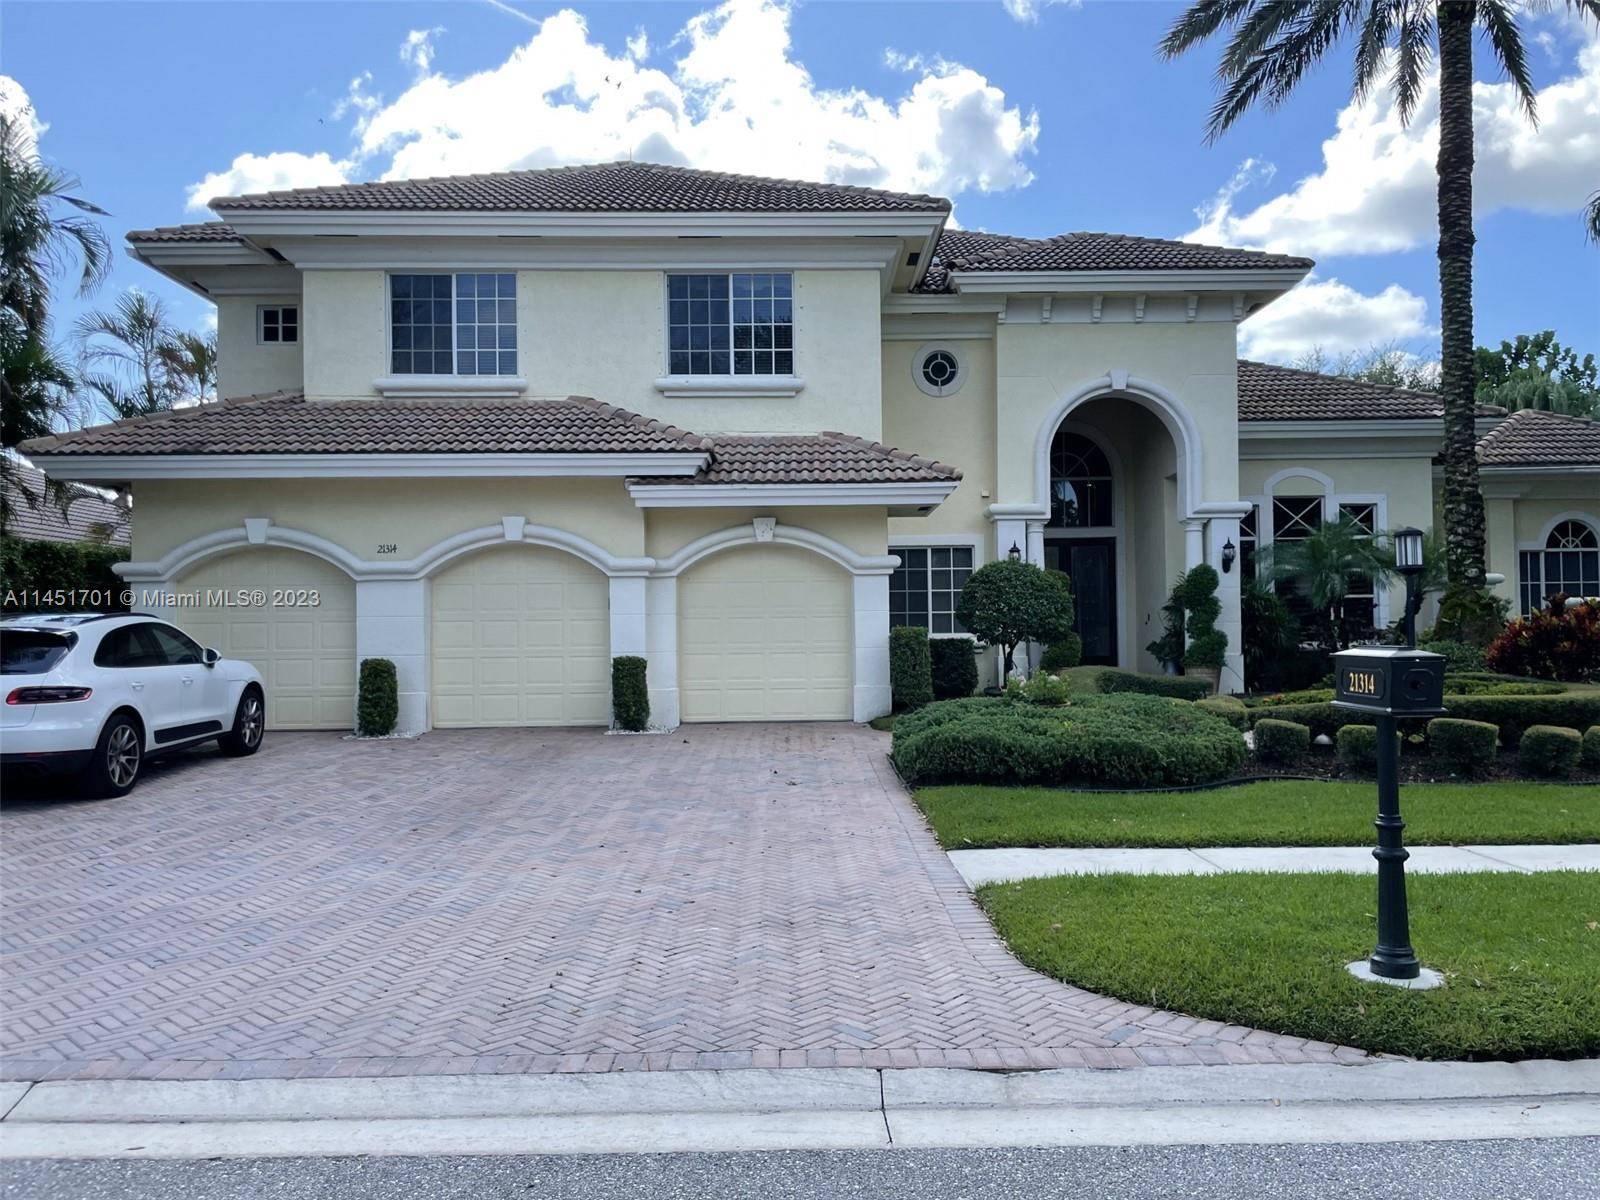 This exquisite home is situated on the sixth fairway of Boca Grove is truly one of a kind.